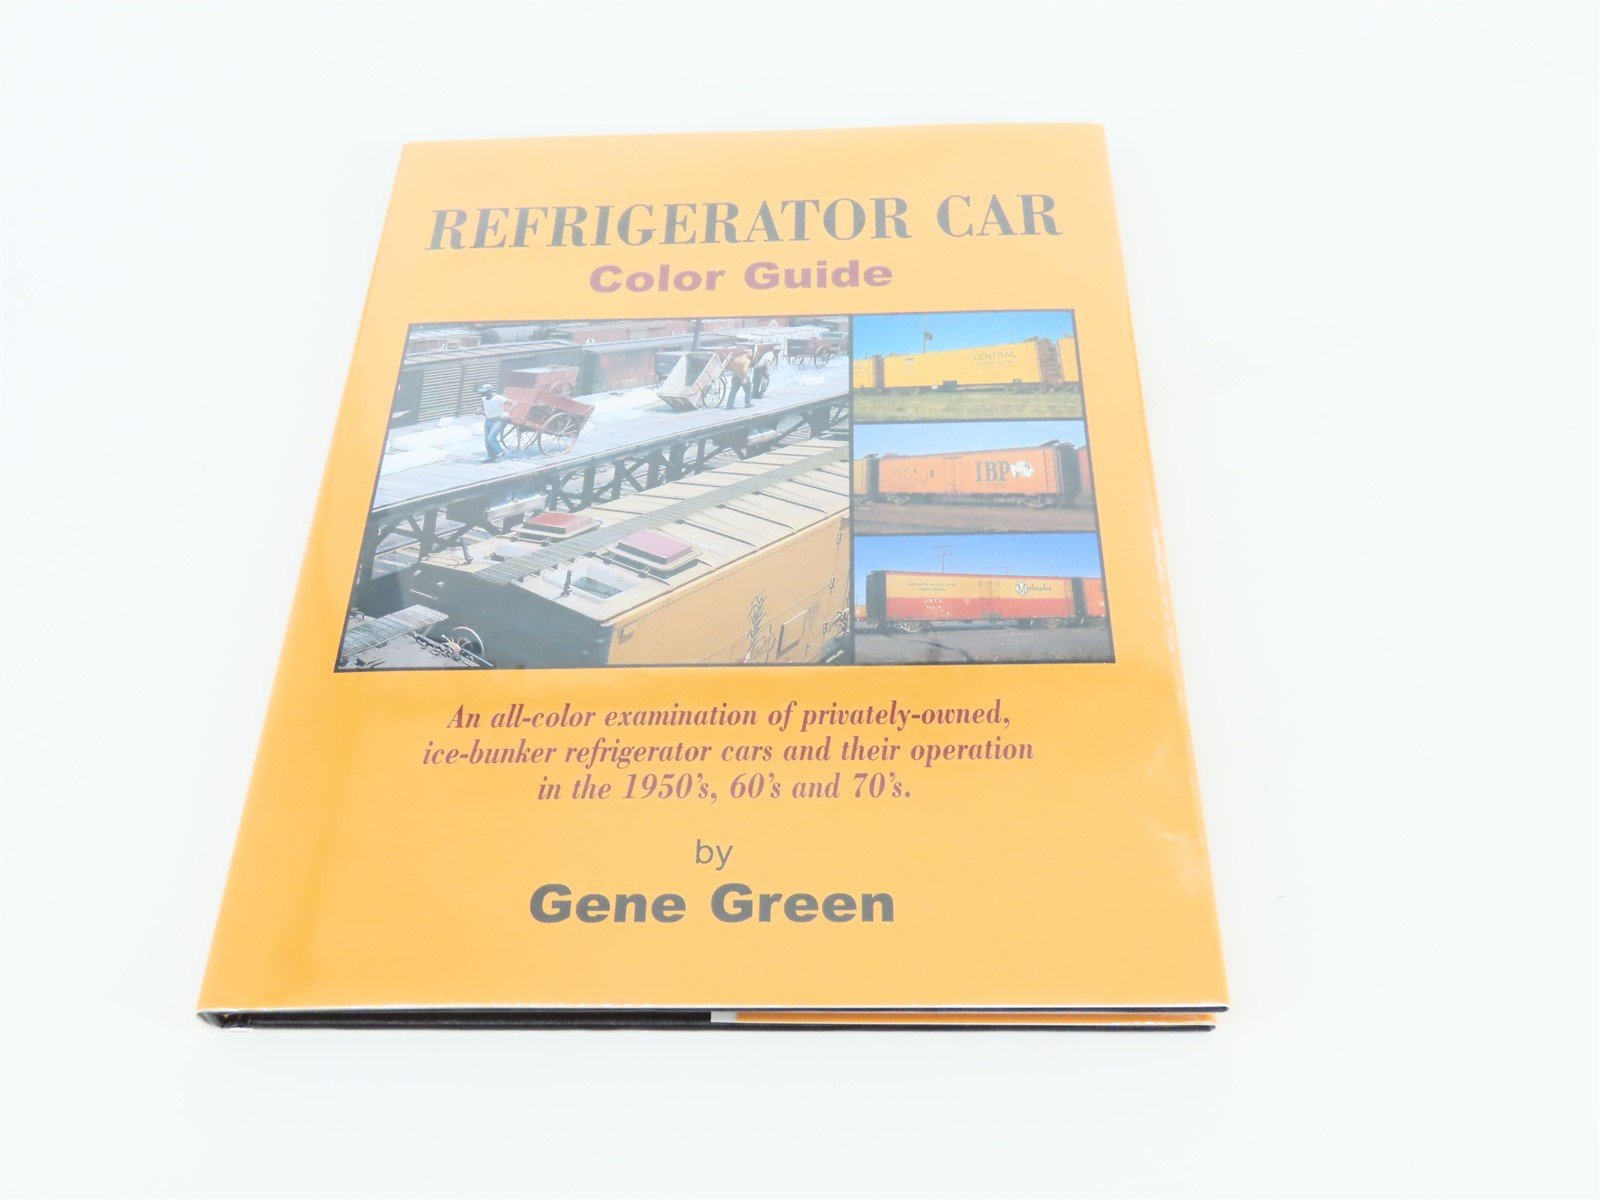 Morning Sun: Refrigerator Car Color Guide by Gene Green ©2005 HC Book